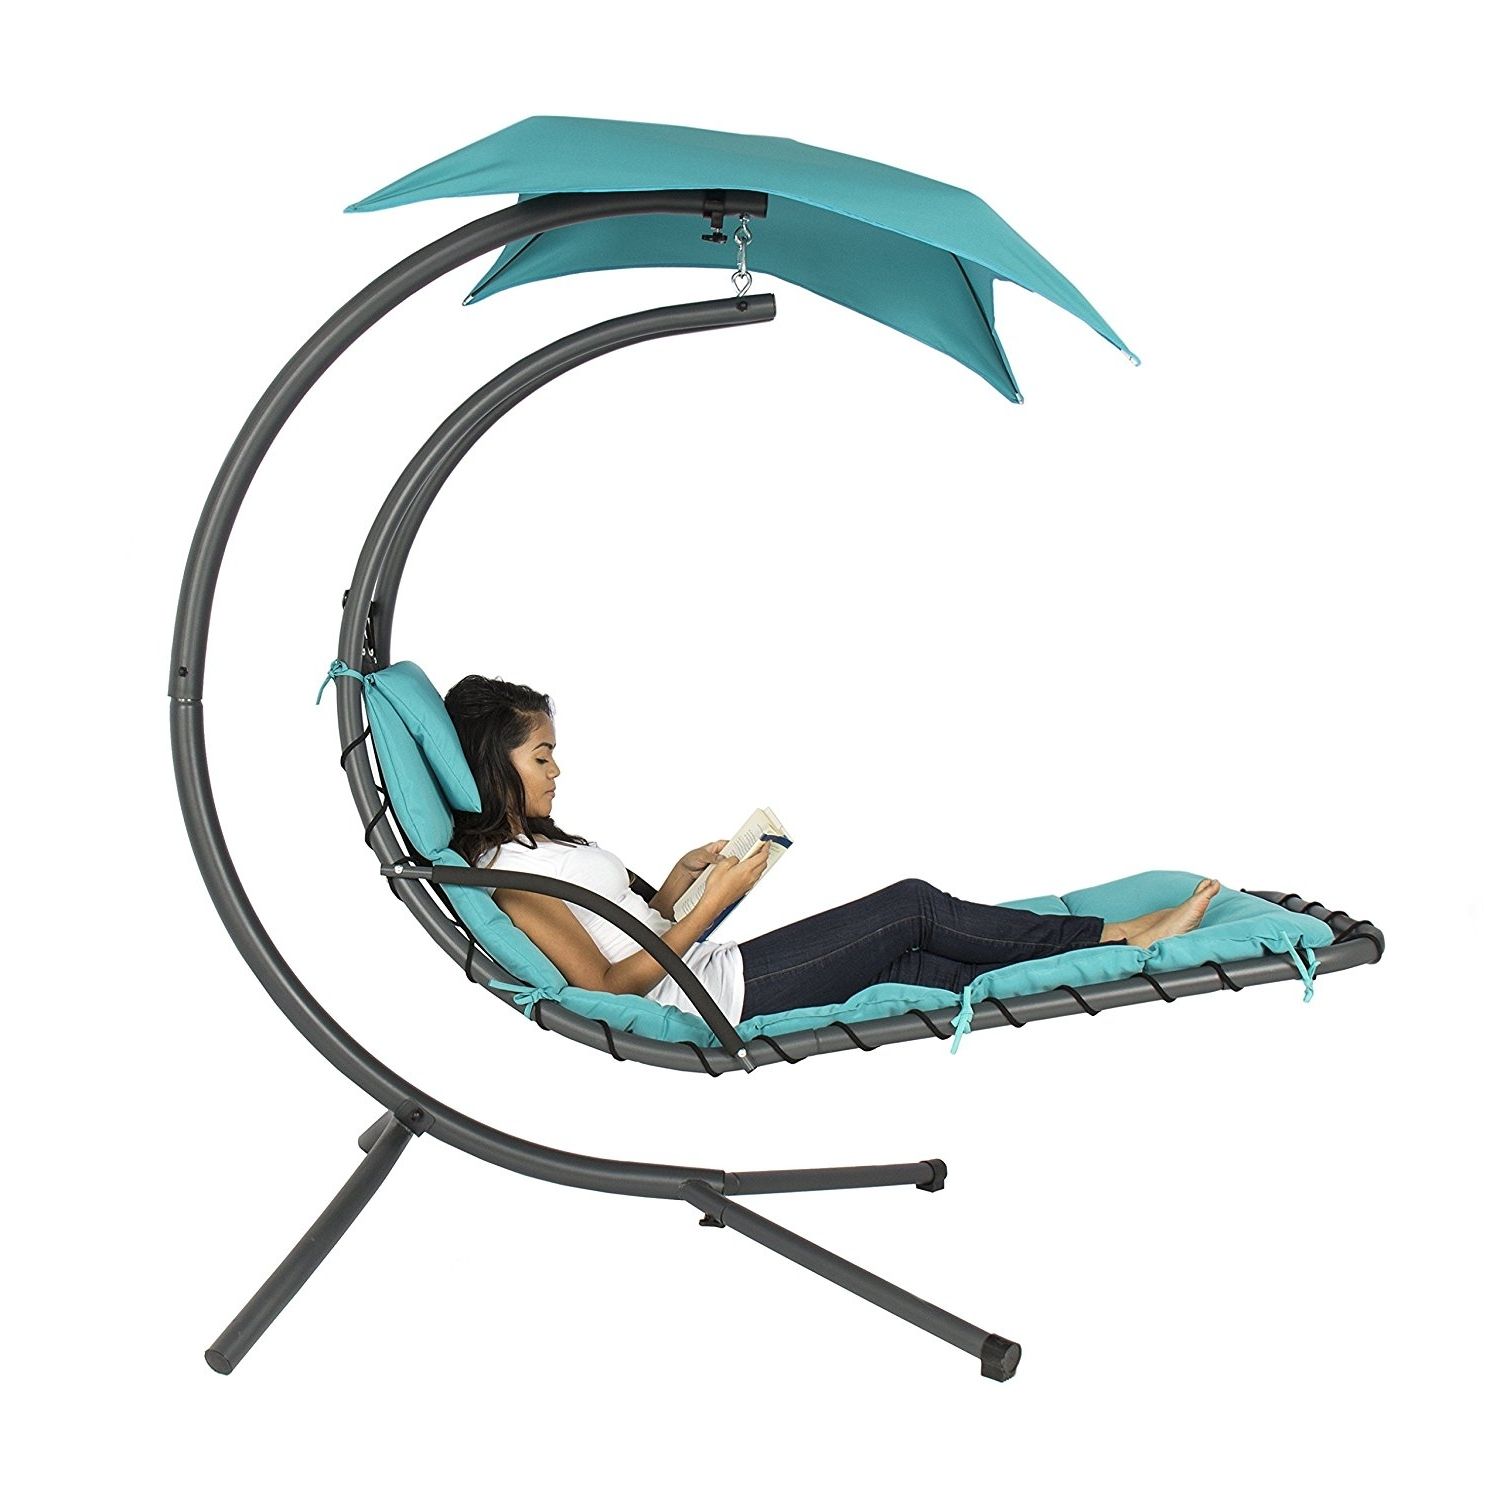 Hanging Chaise Lounge Chairs With Current Amazon: Best Choice Products Hanging Chaise Lounger Chair Arc (View 1 of 15)